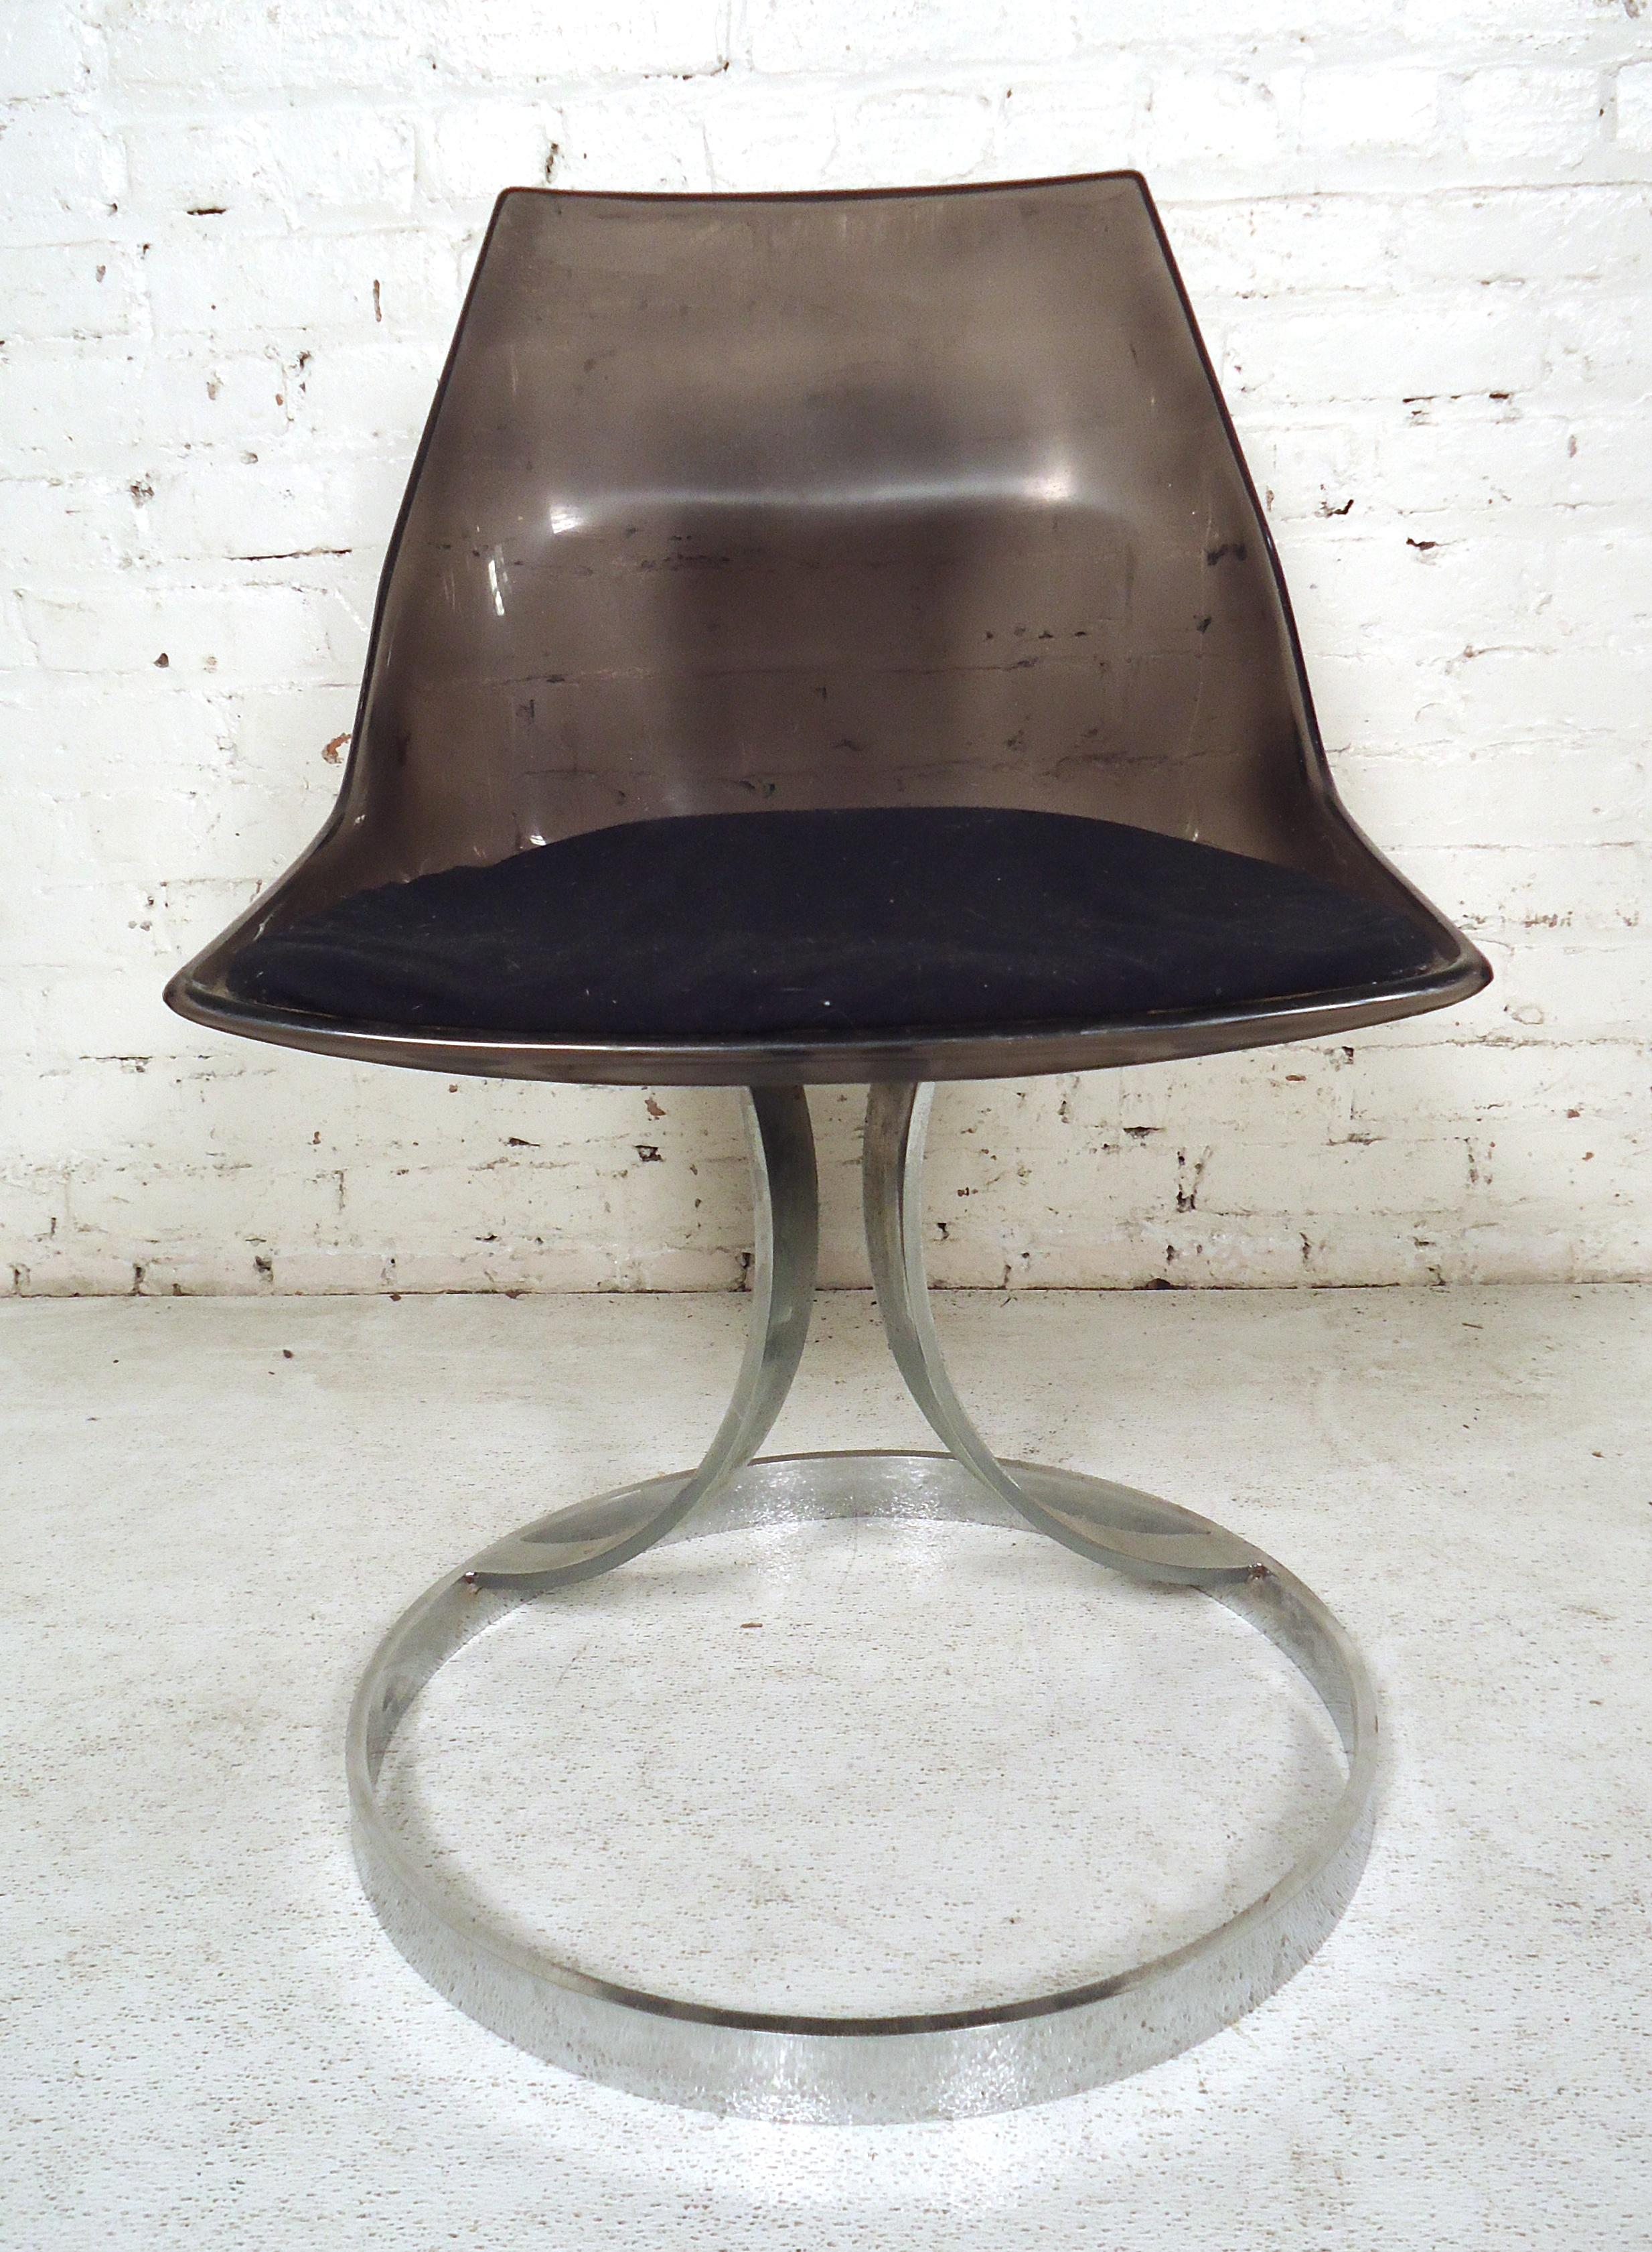 Italian Mid-Century Modern style Lucite chair featuring chrome legs and upholstered cushion.

(Please confirm item location - NY or NJ - with dealer).
 